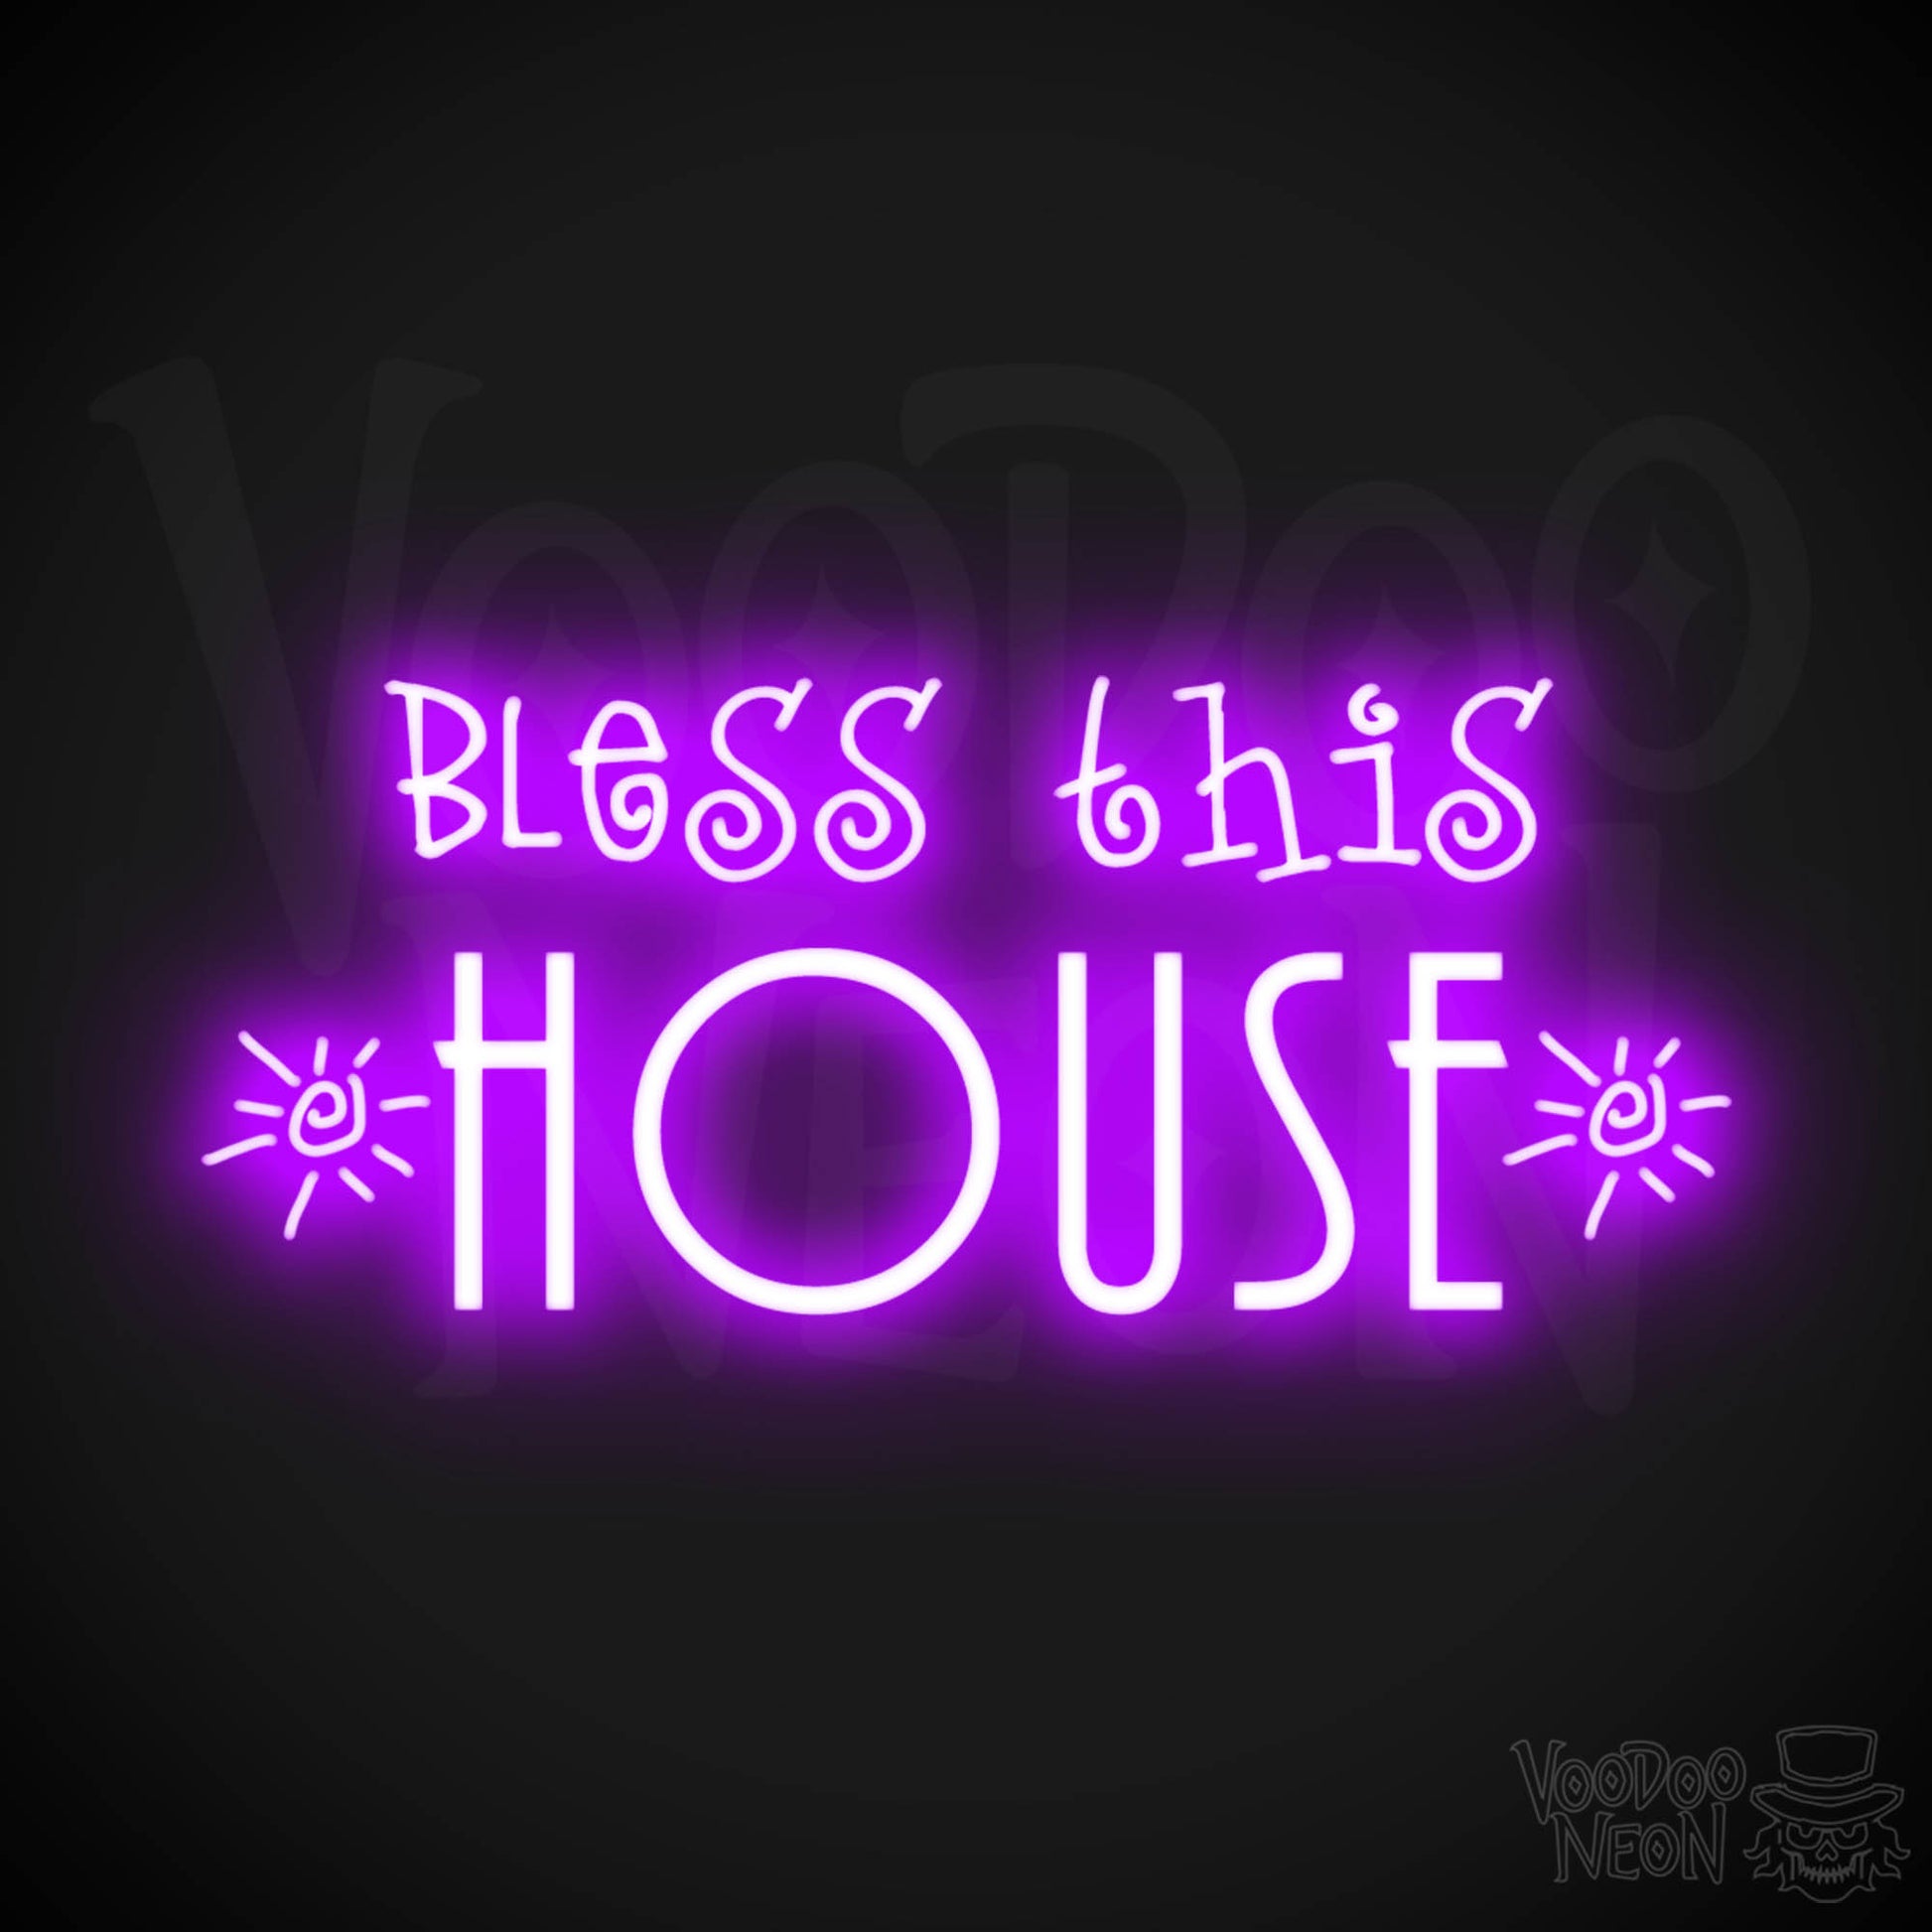 Bless This House Neon Sign - Neon Bless This House Sign - LED Light Up Sign - Color Purple